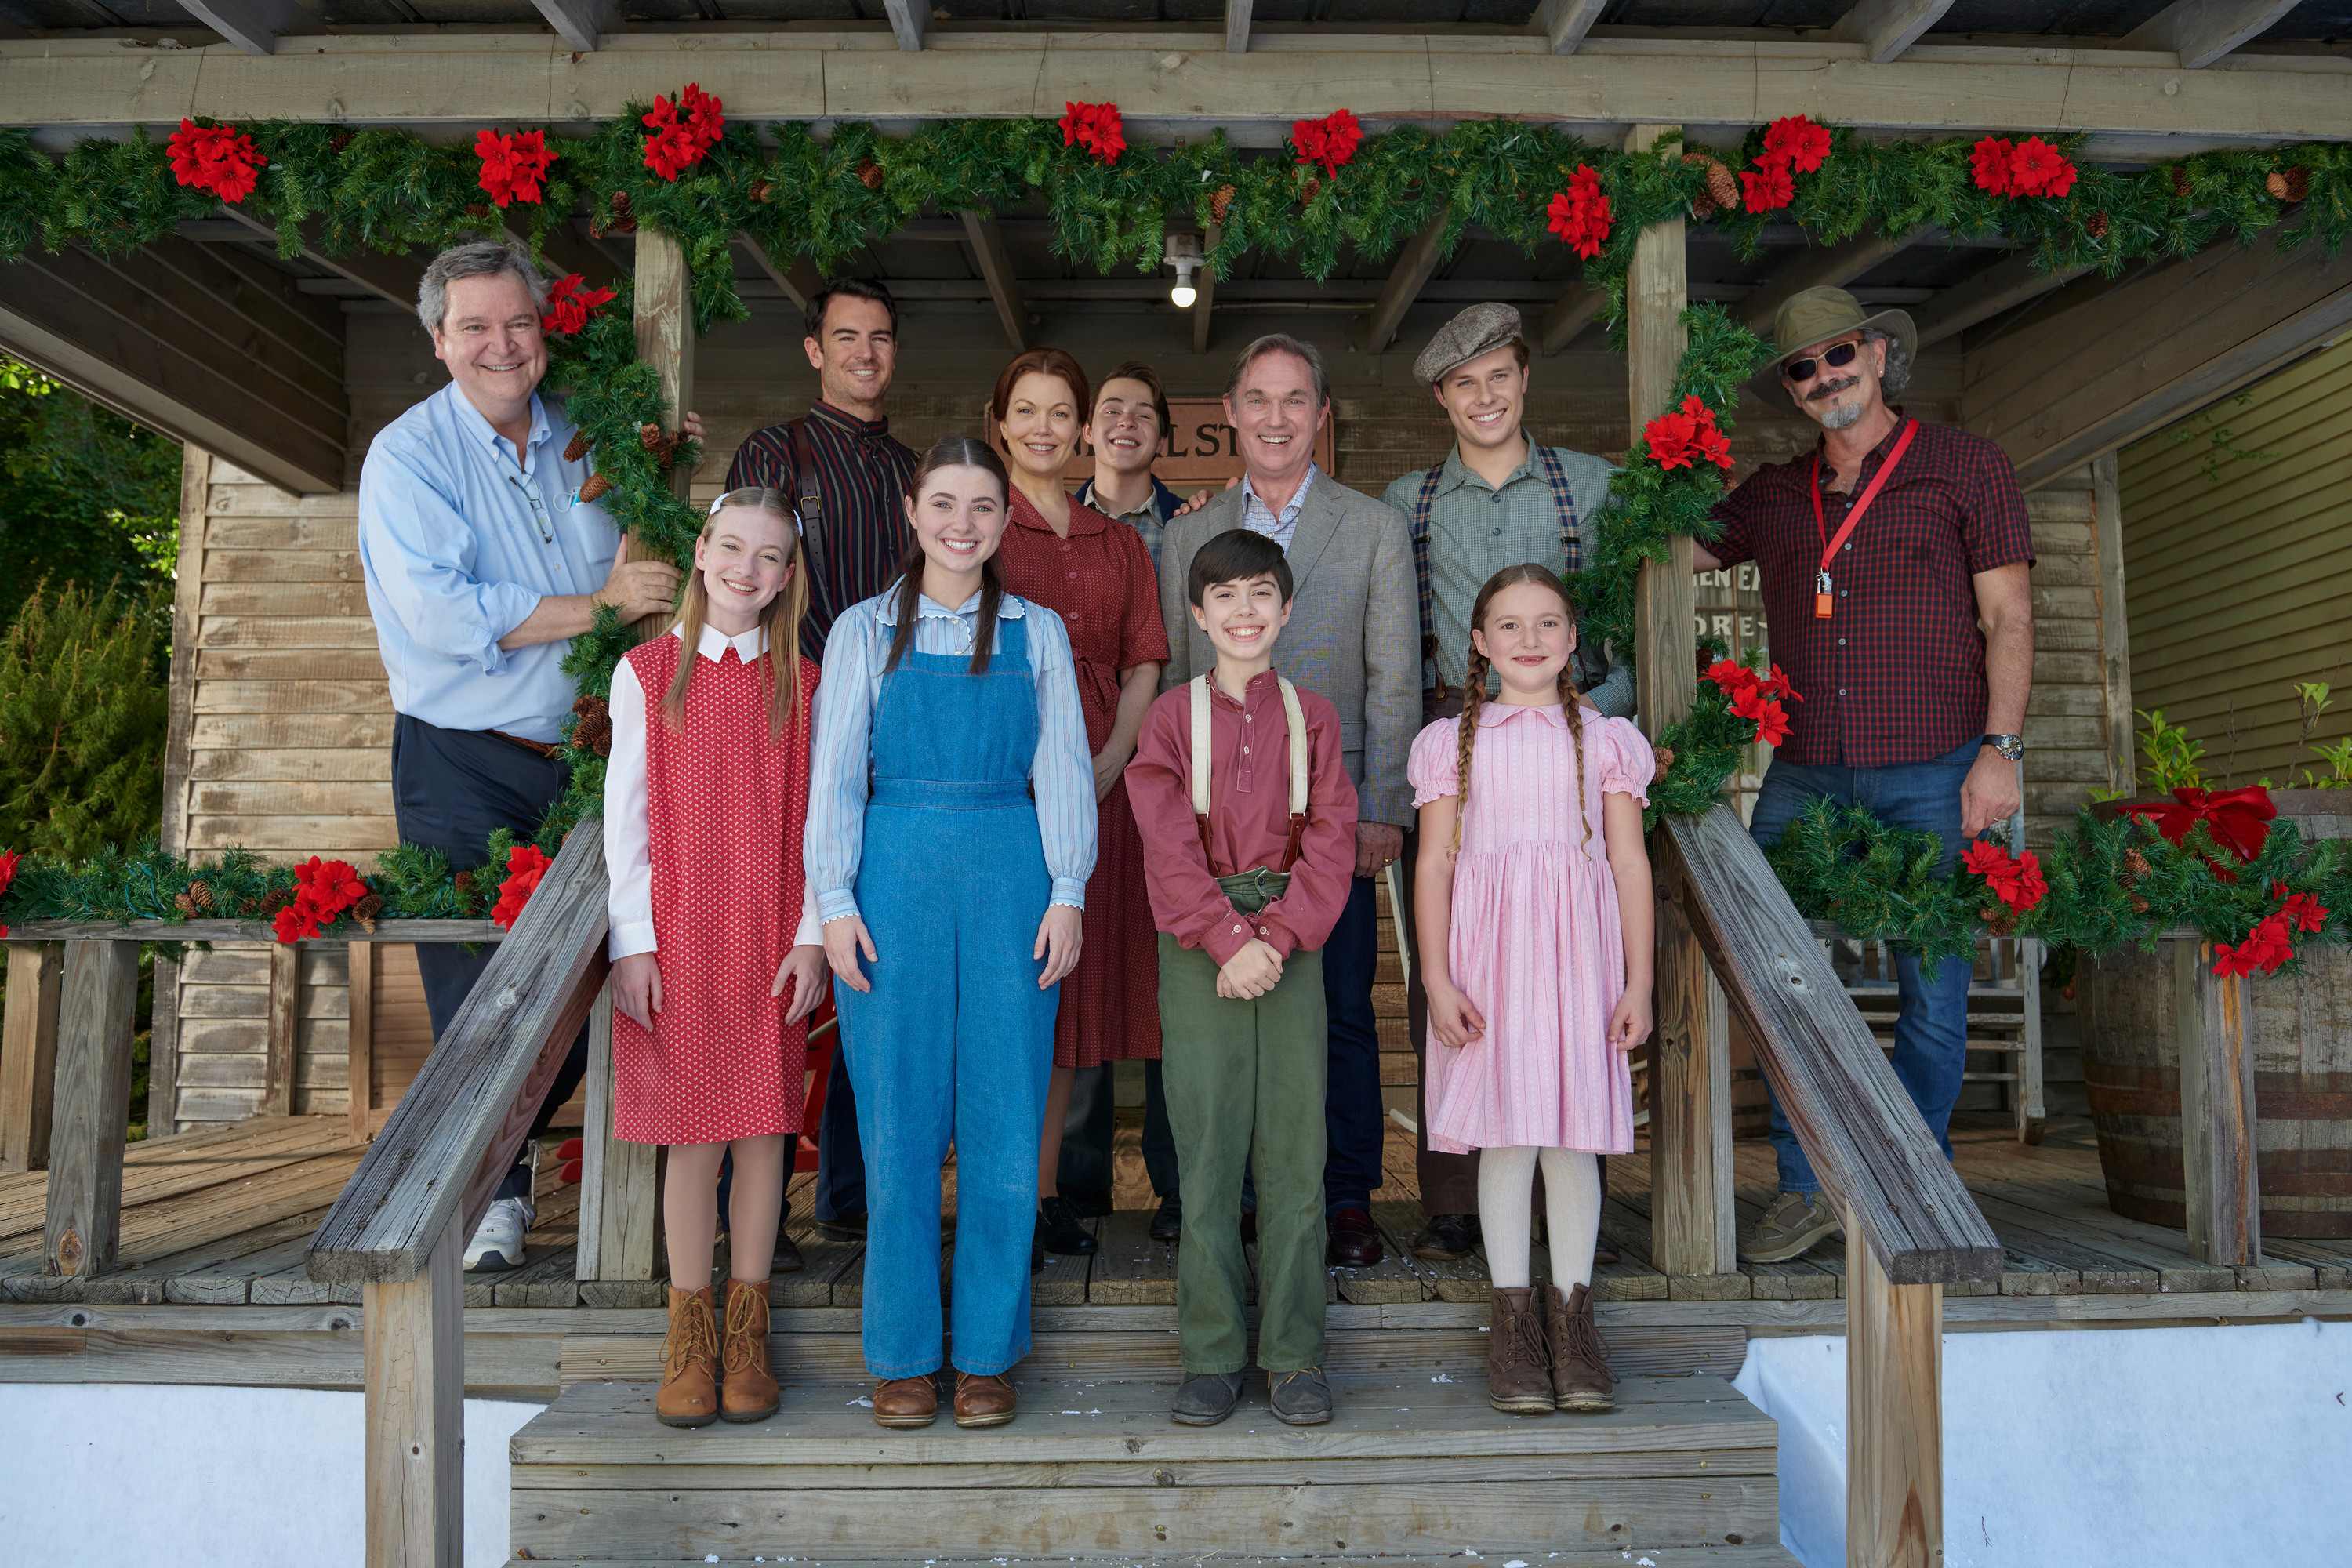 The Waltons Homecoming on the CW brings back a 1970s classic family drama pic